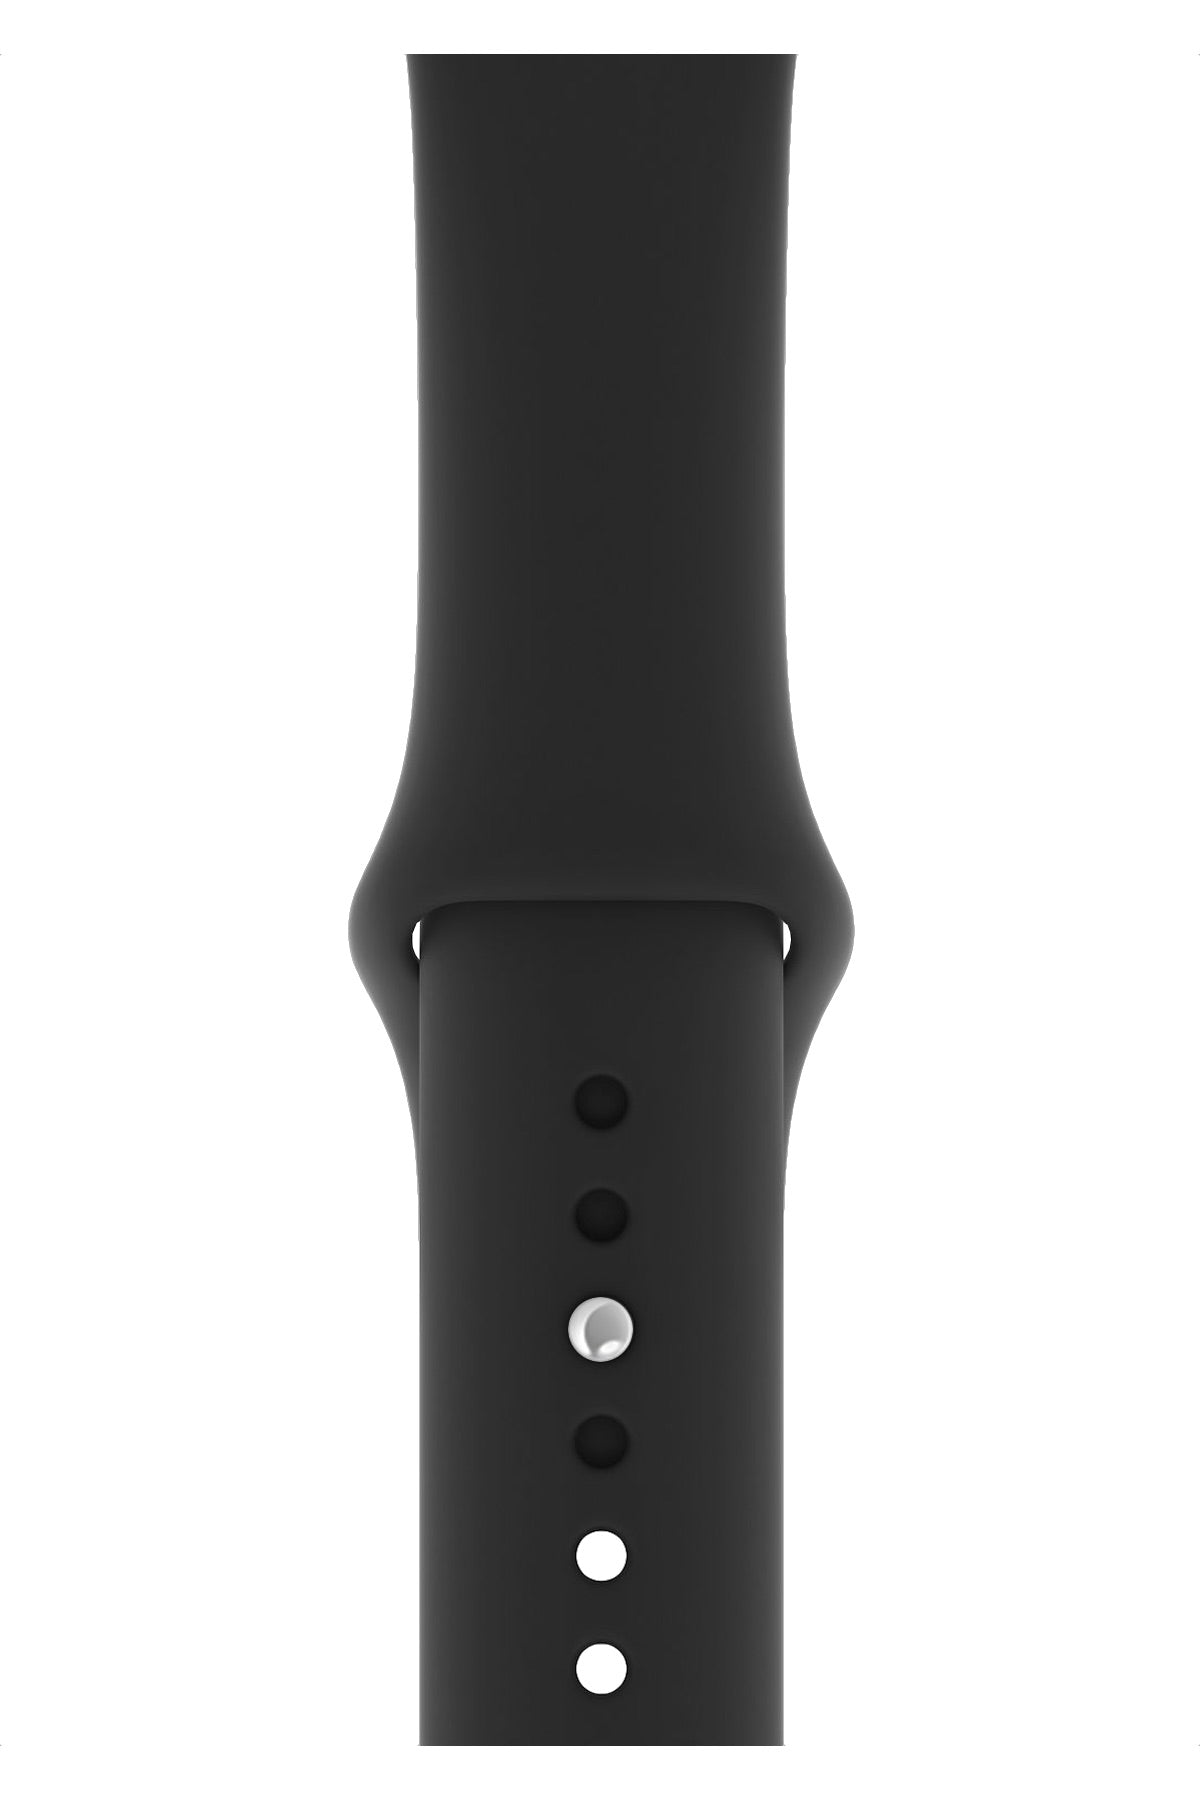 Apple Watch Compatible Silicone Sport Band Griseo 